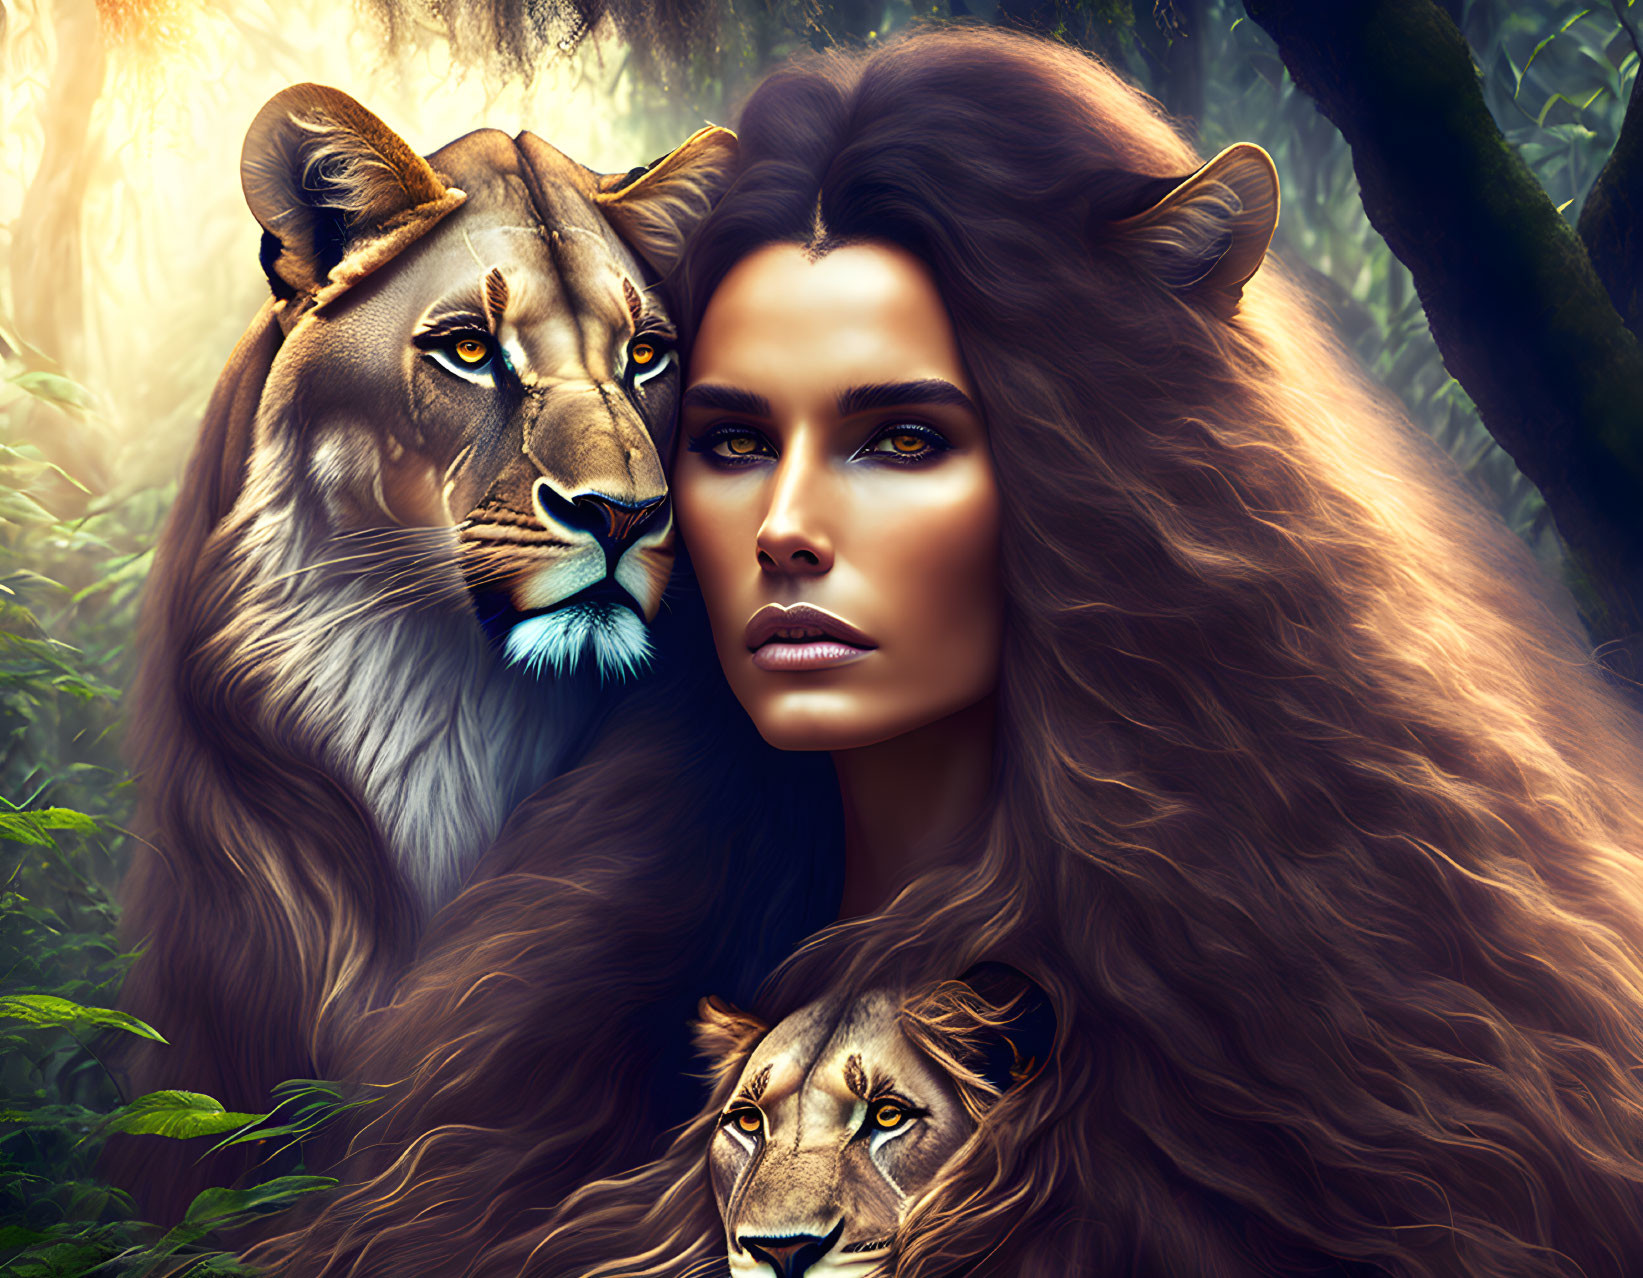 A woman and a lion